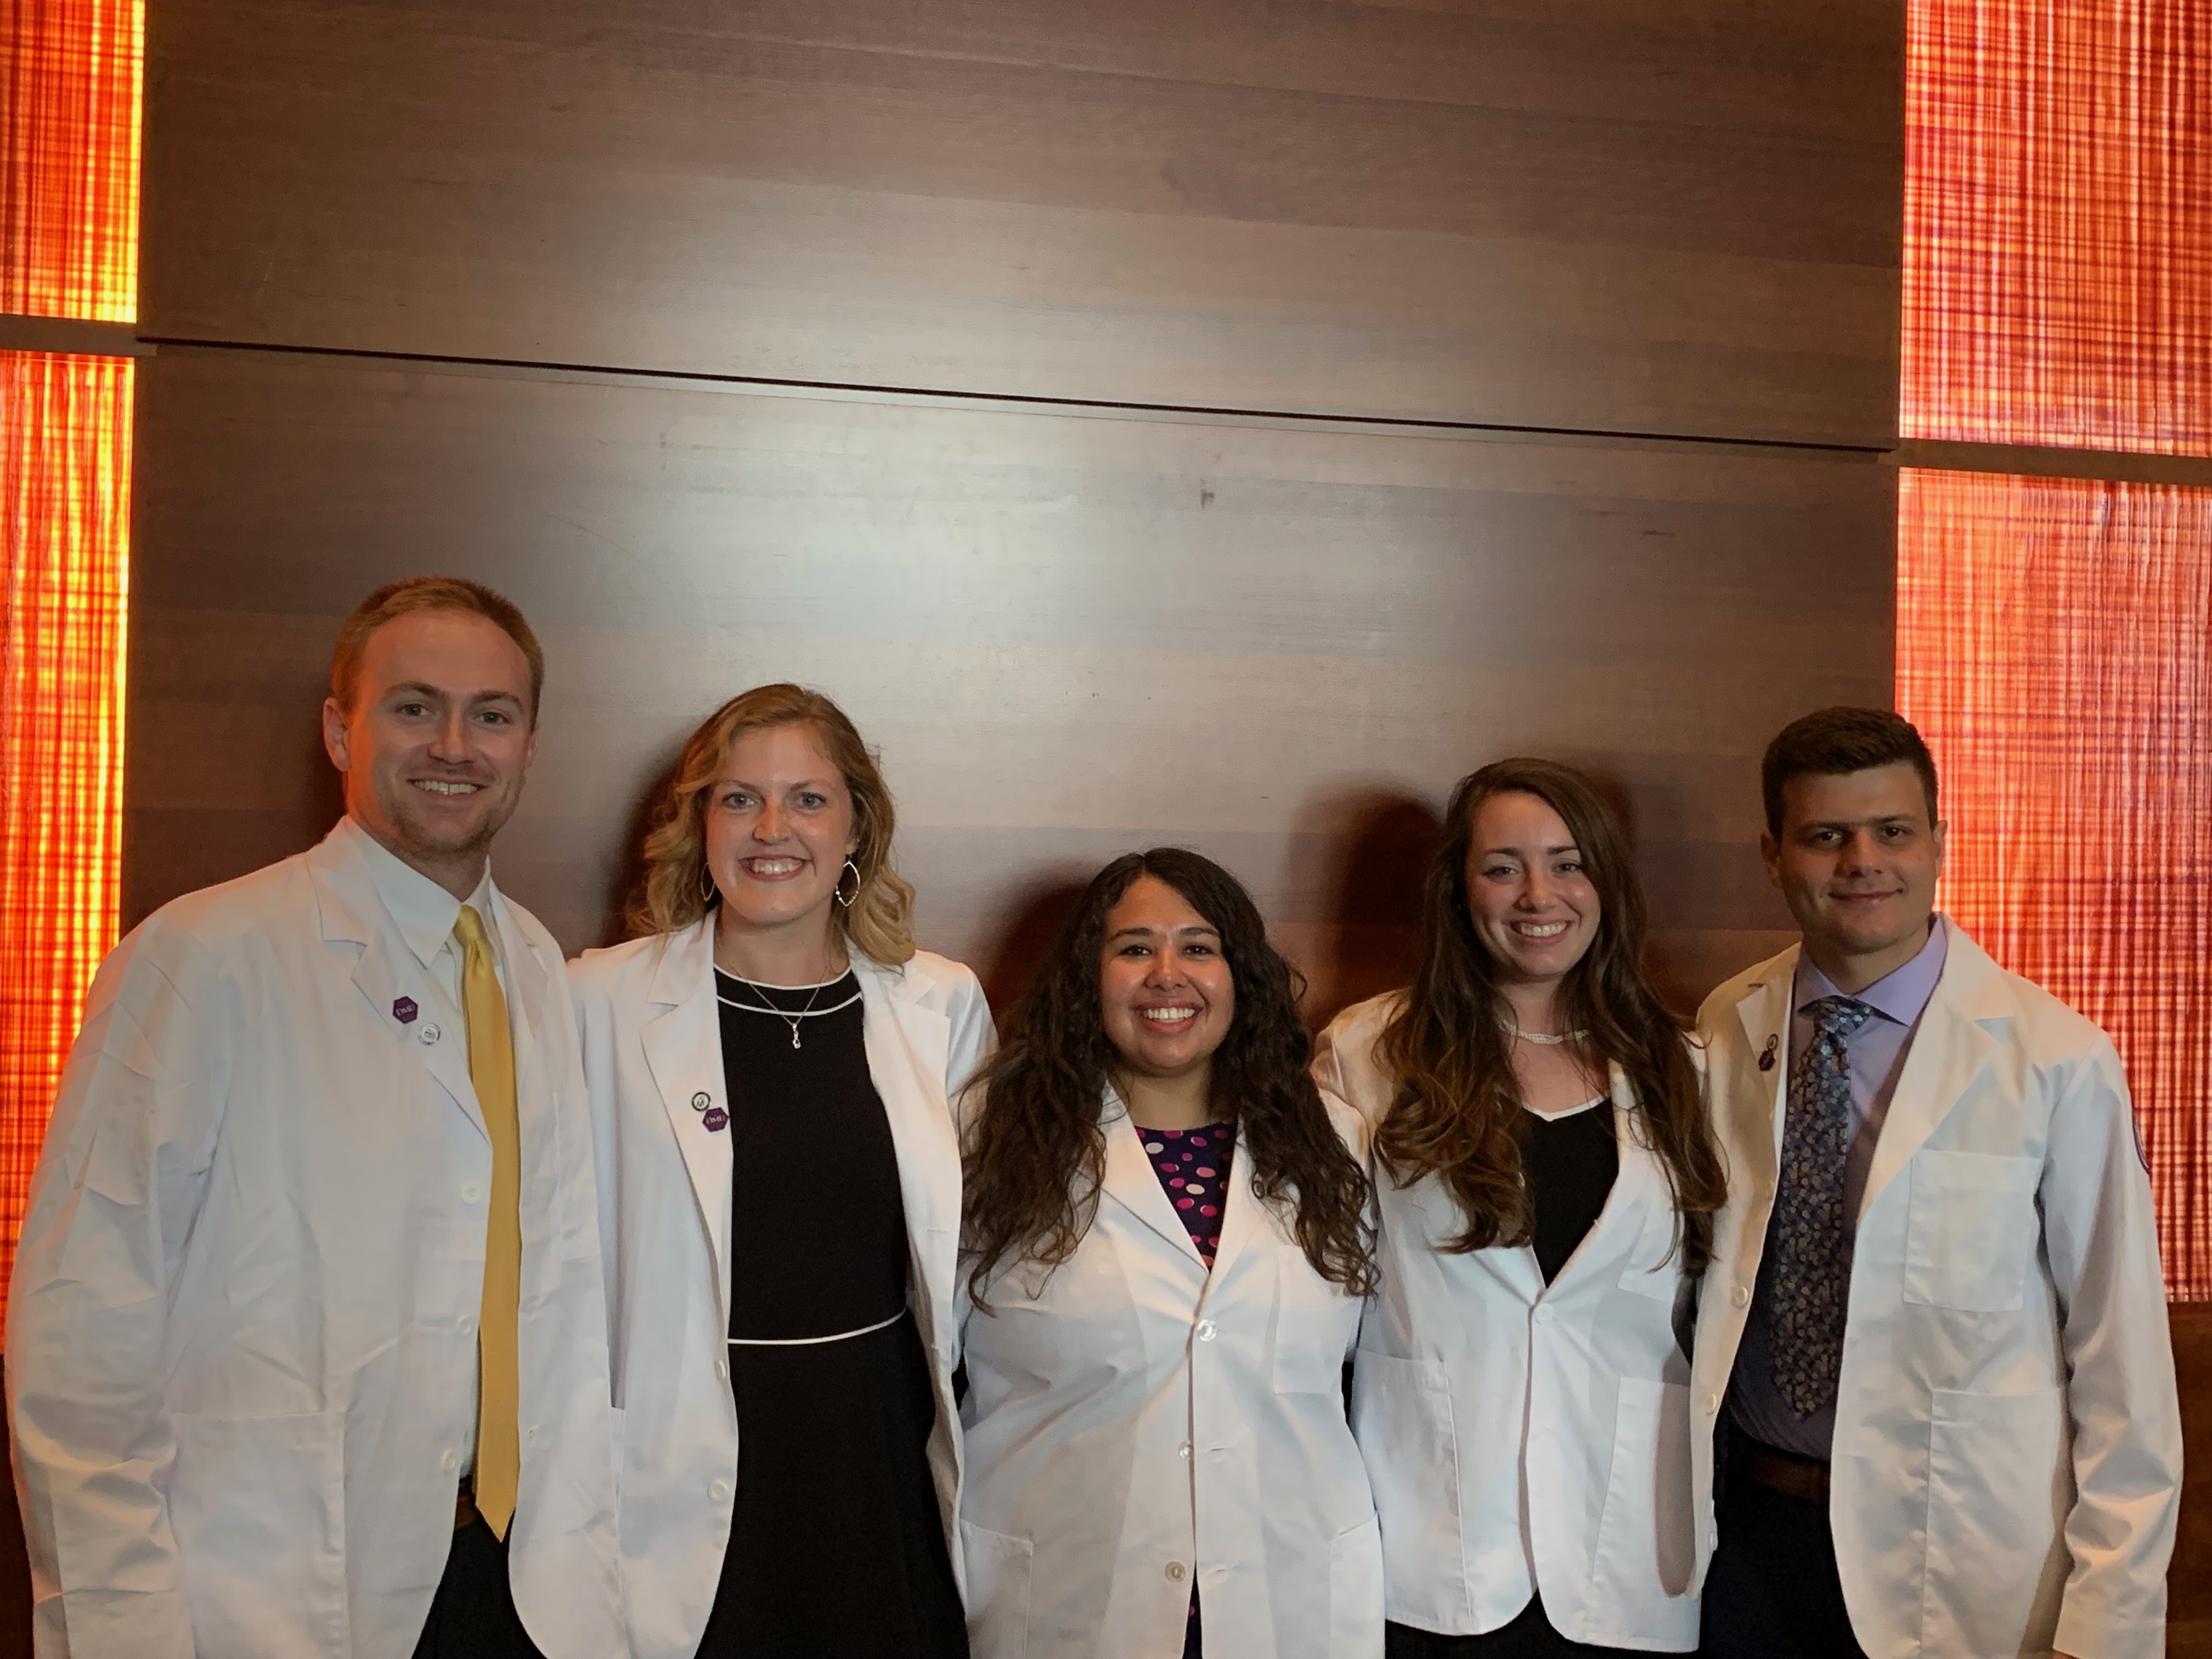 One-Year Master's Alumni who are becoming Doctors at Des Moines University, pictured is the White Coat Ceremony